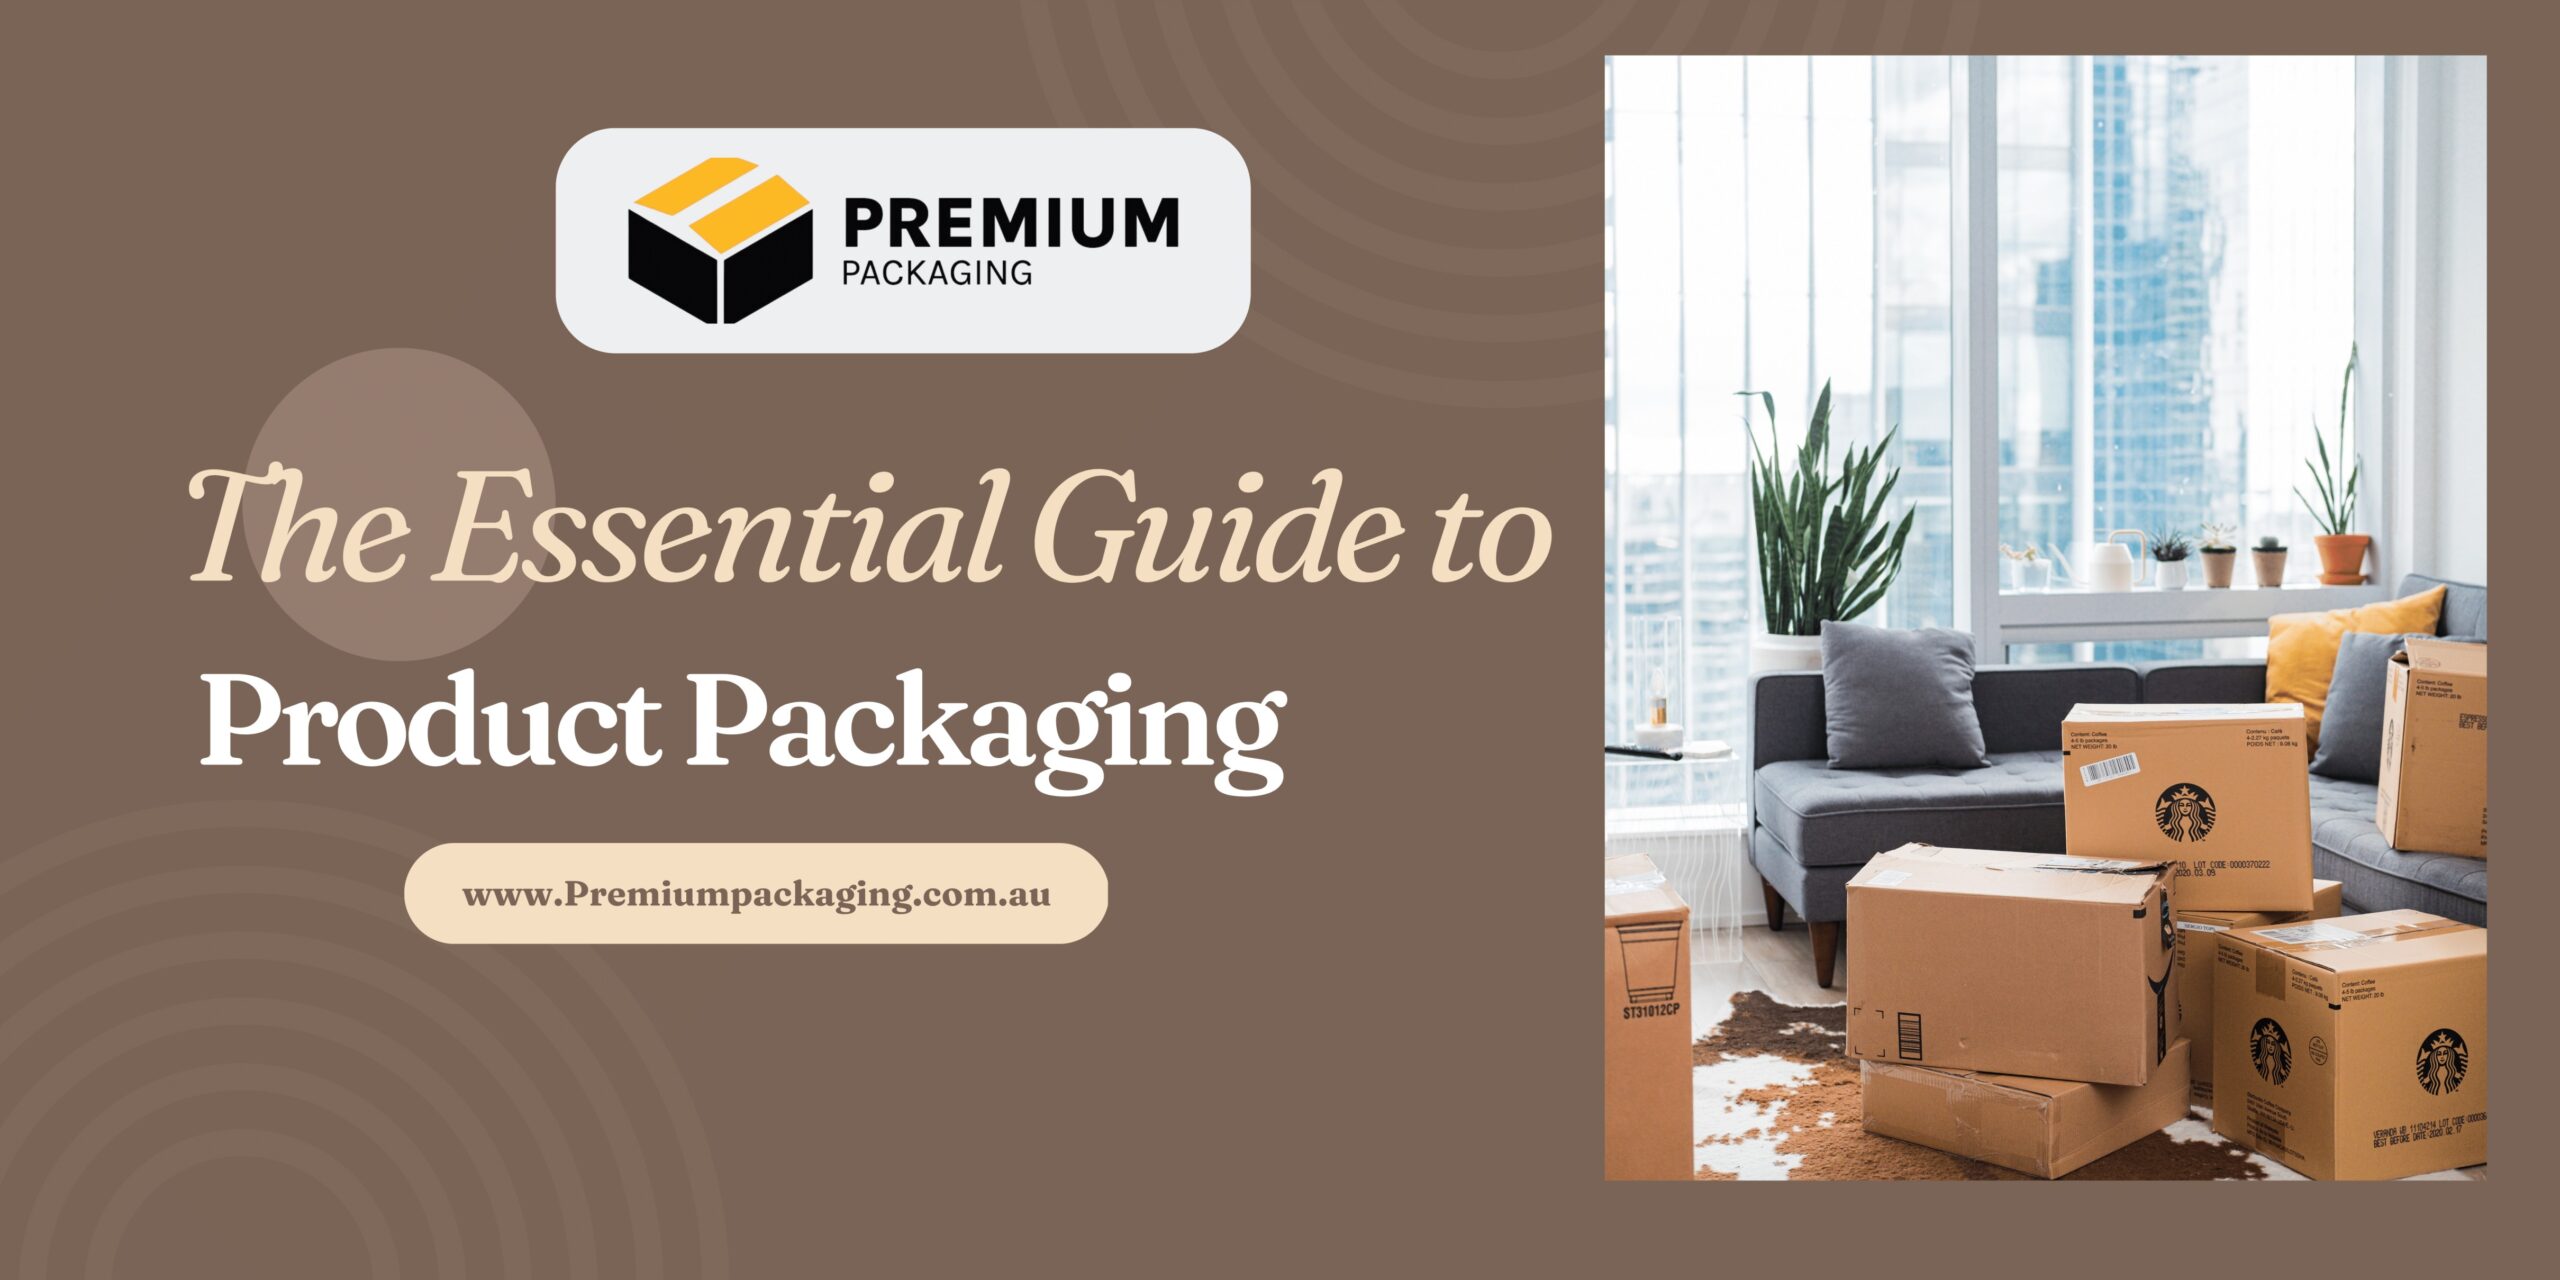 The Essential Guide to Product Packaging